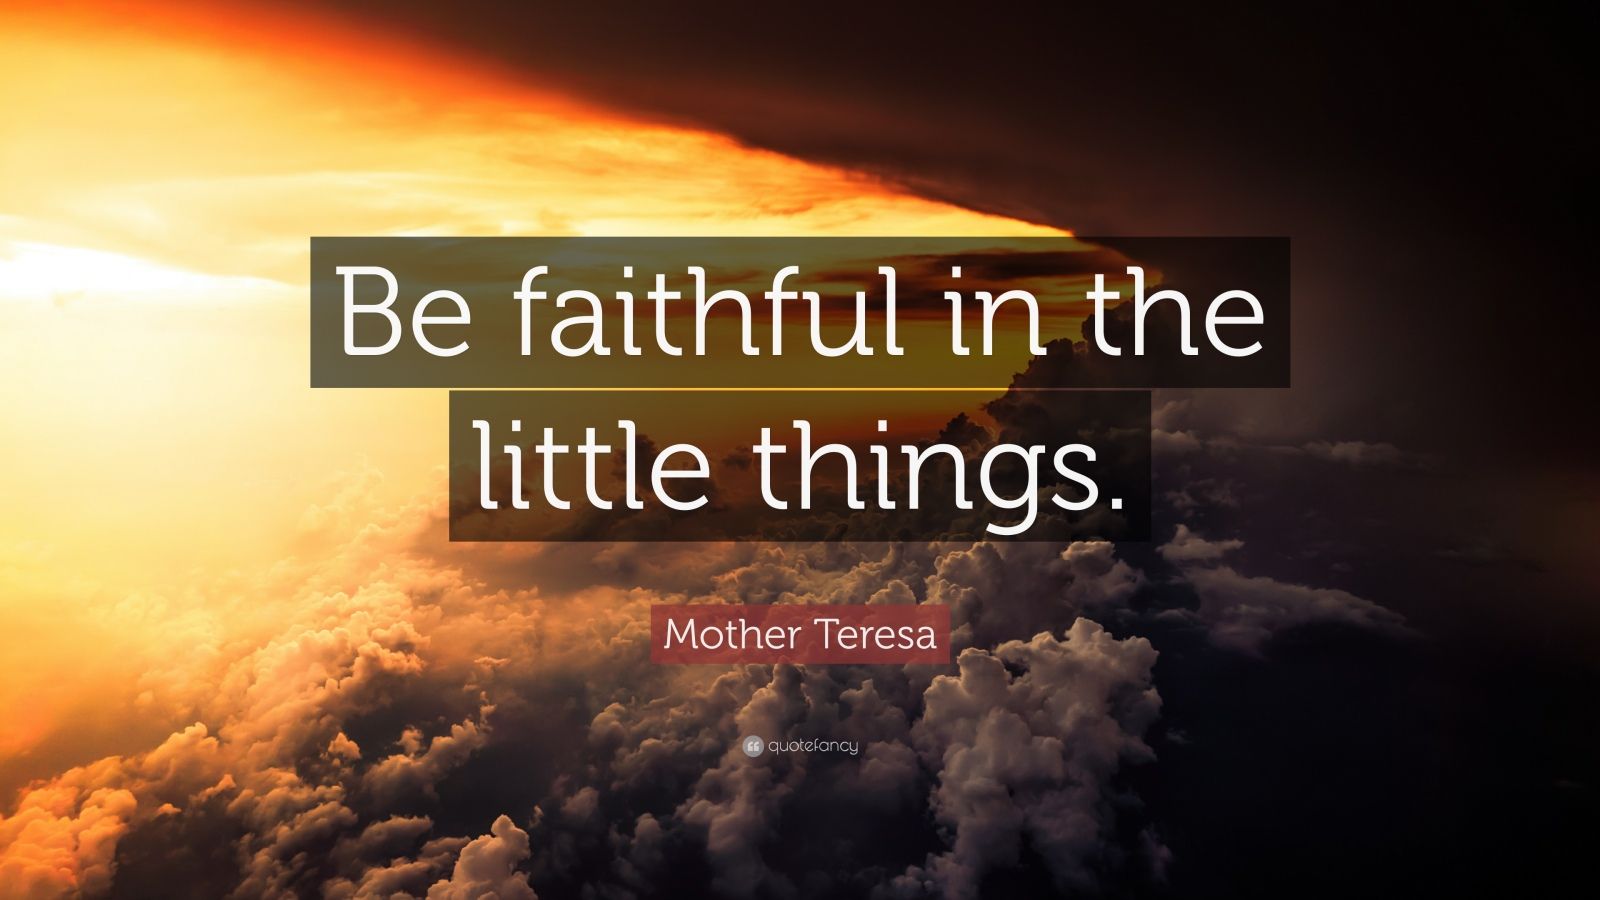 Mother Teresa Quote: “Be faithful in the little things.” (12 wallpapers